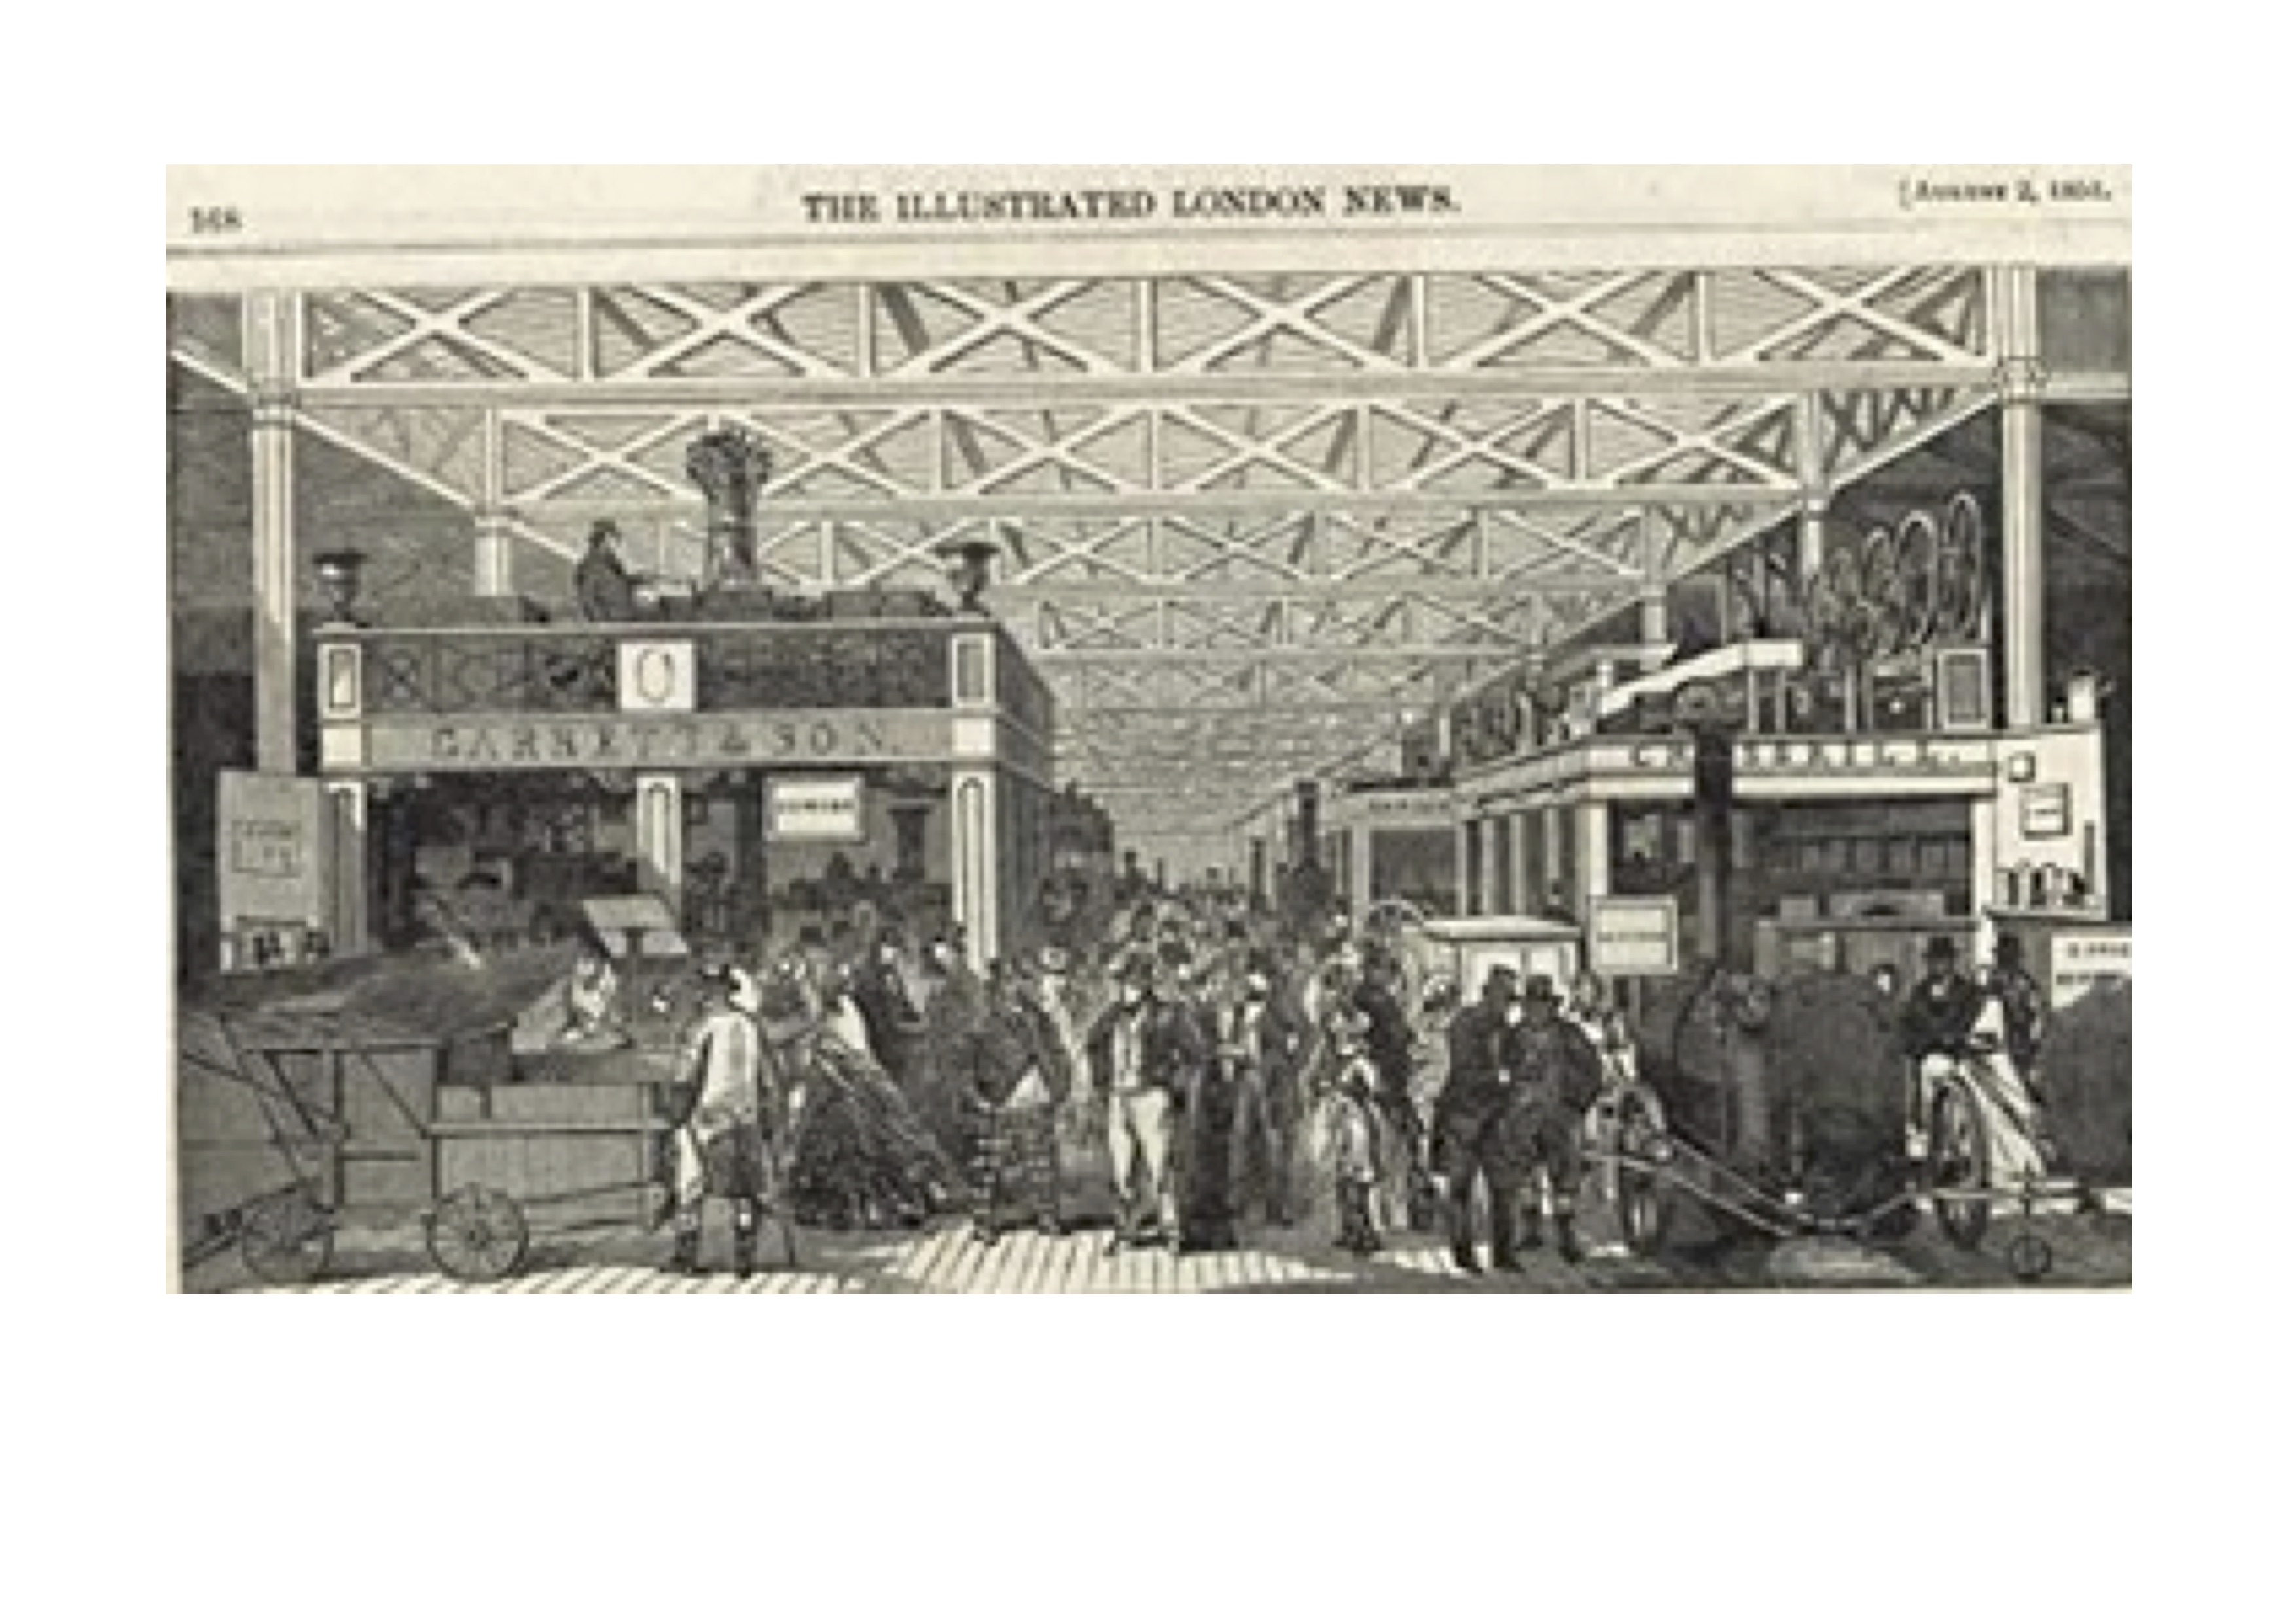 Crystal Palace & Gt Exhibition